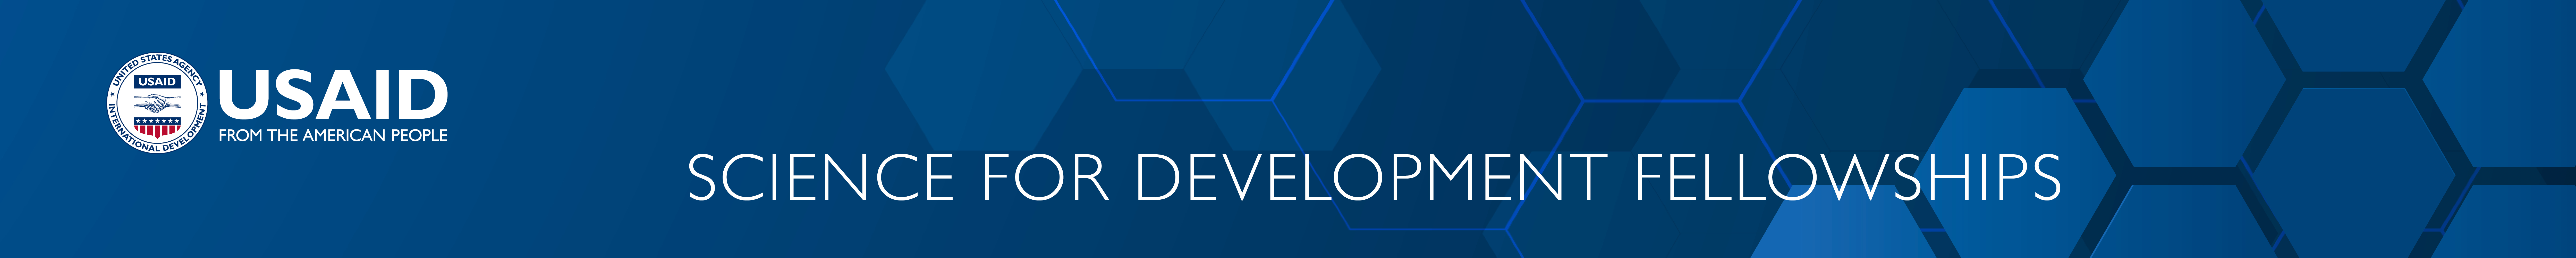 USAID Science for Development Fellowships logo